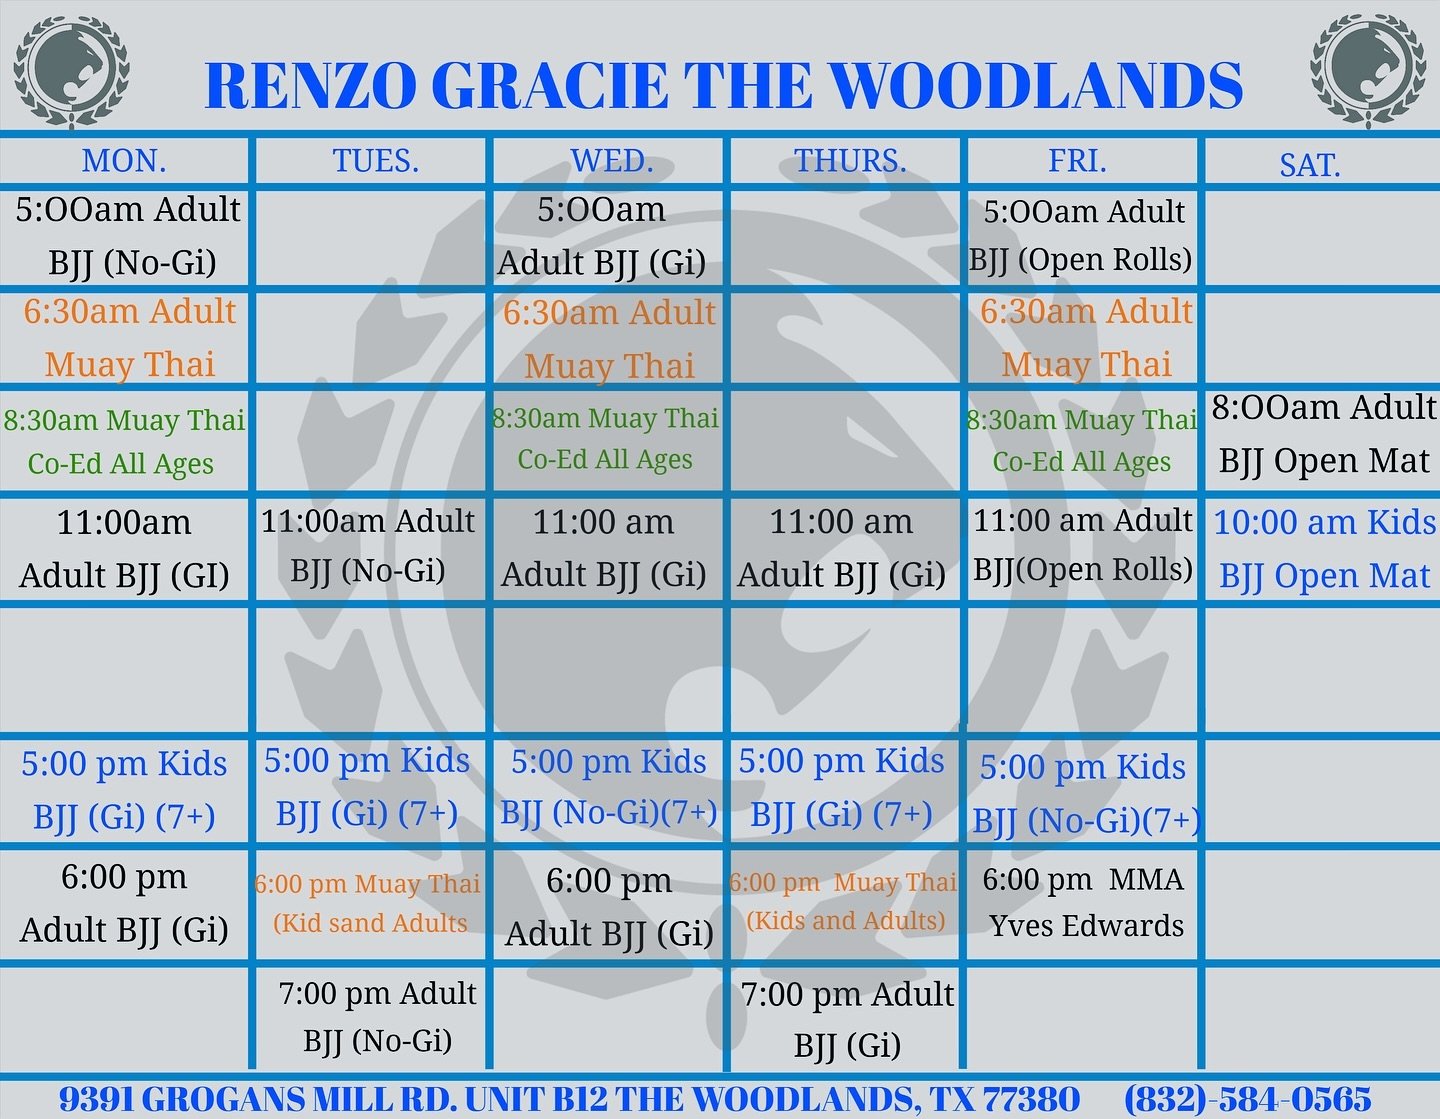 🥋🌟 New Schedule Alert at Renzo Gracie The Woodlands! 

Whether you&rsquo;re a beginner or a seasoned fighter, we have classes for everyone:
Muay Thai for All Ages: 
  Mondays, Wednesdays &amp; Fridays at 8:30 AM
  Tuesdays &amp; Thursdays at 6 PM

